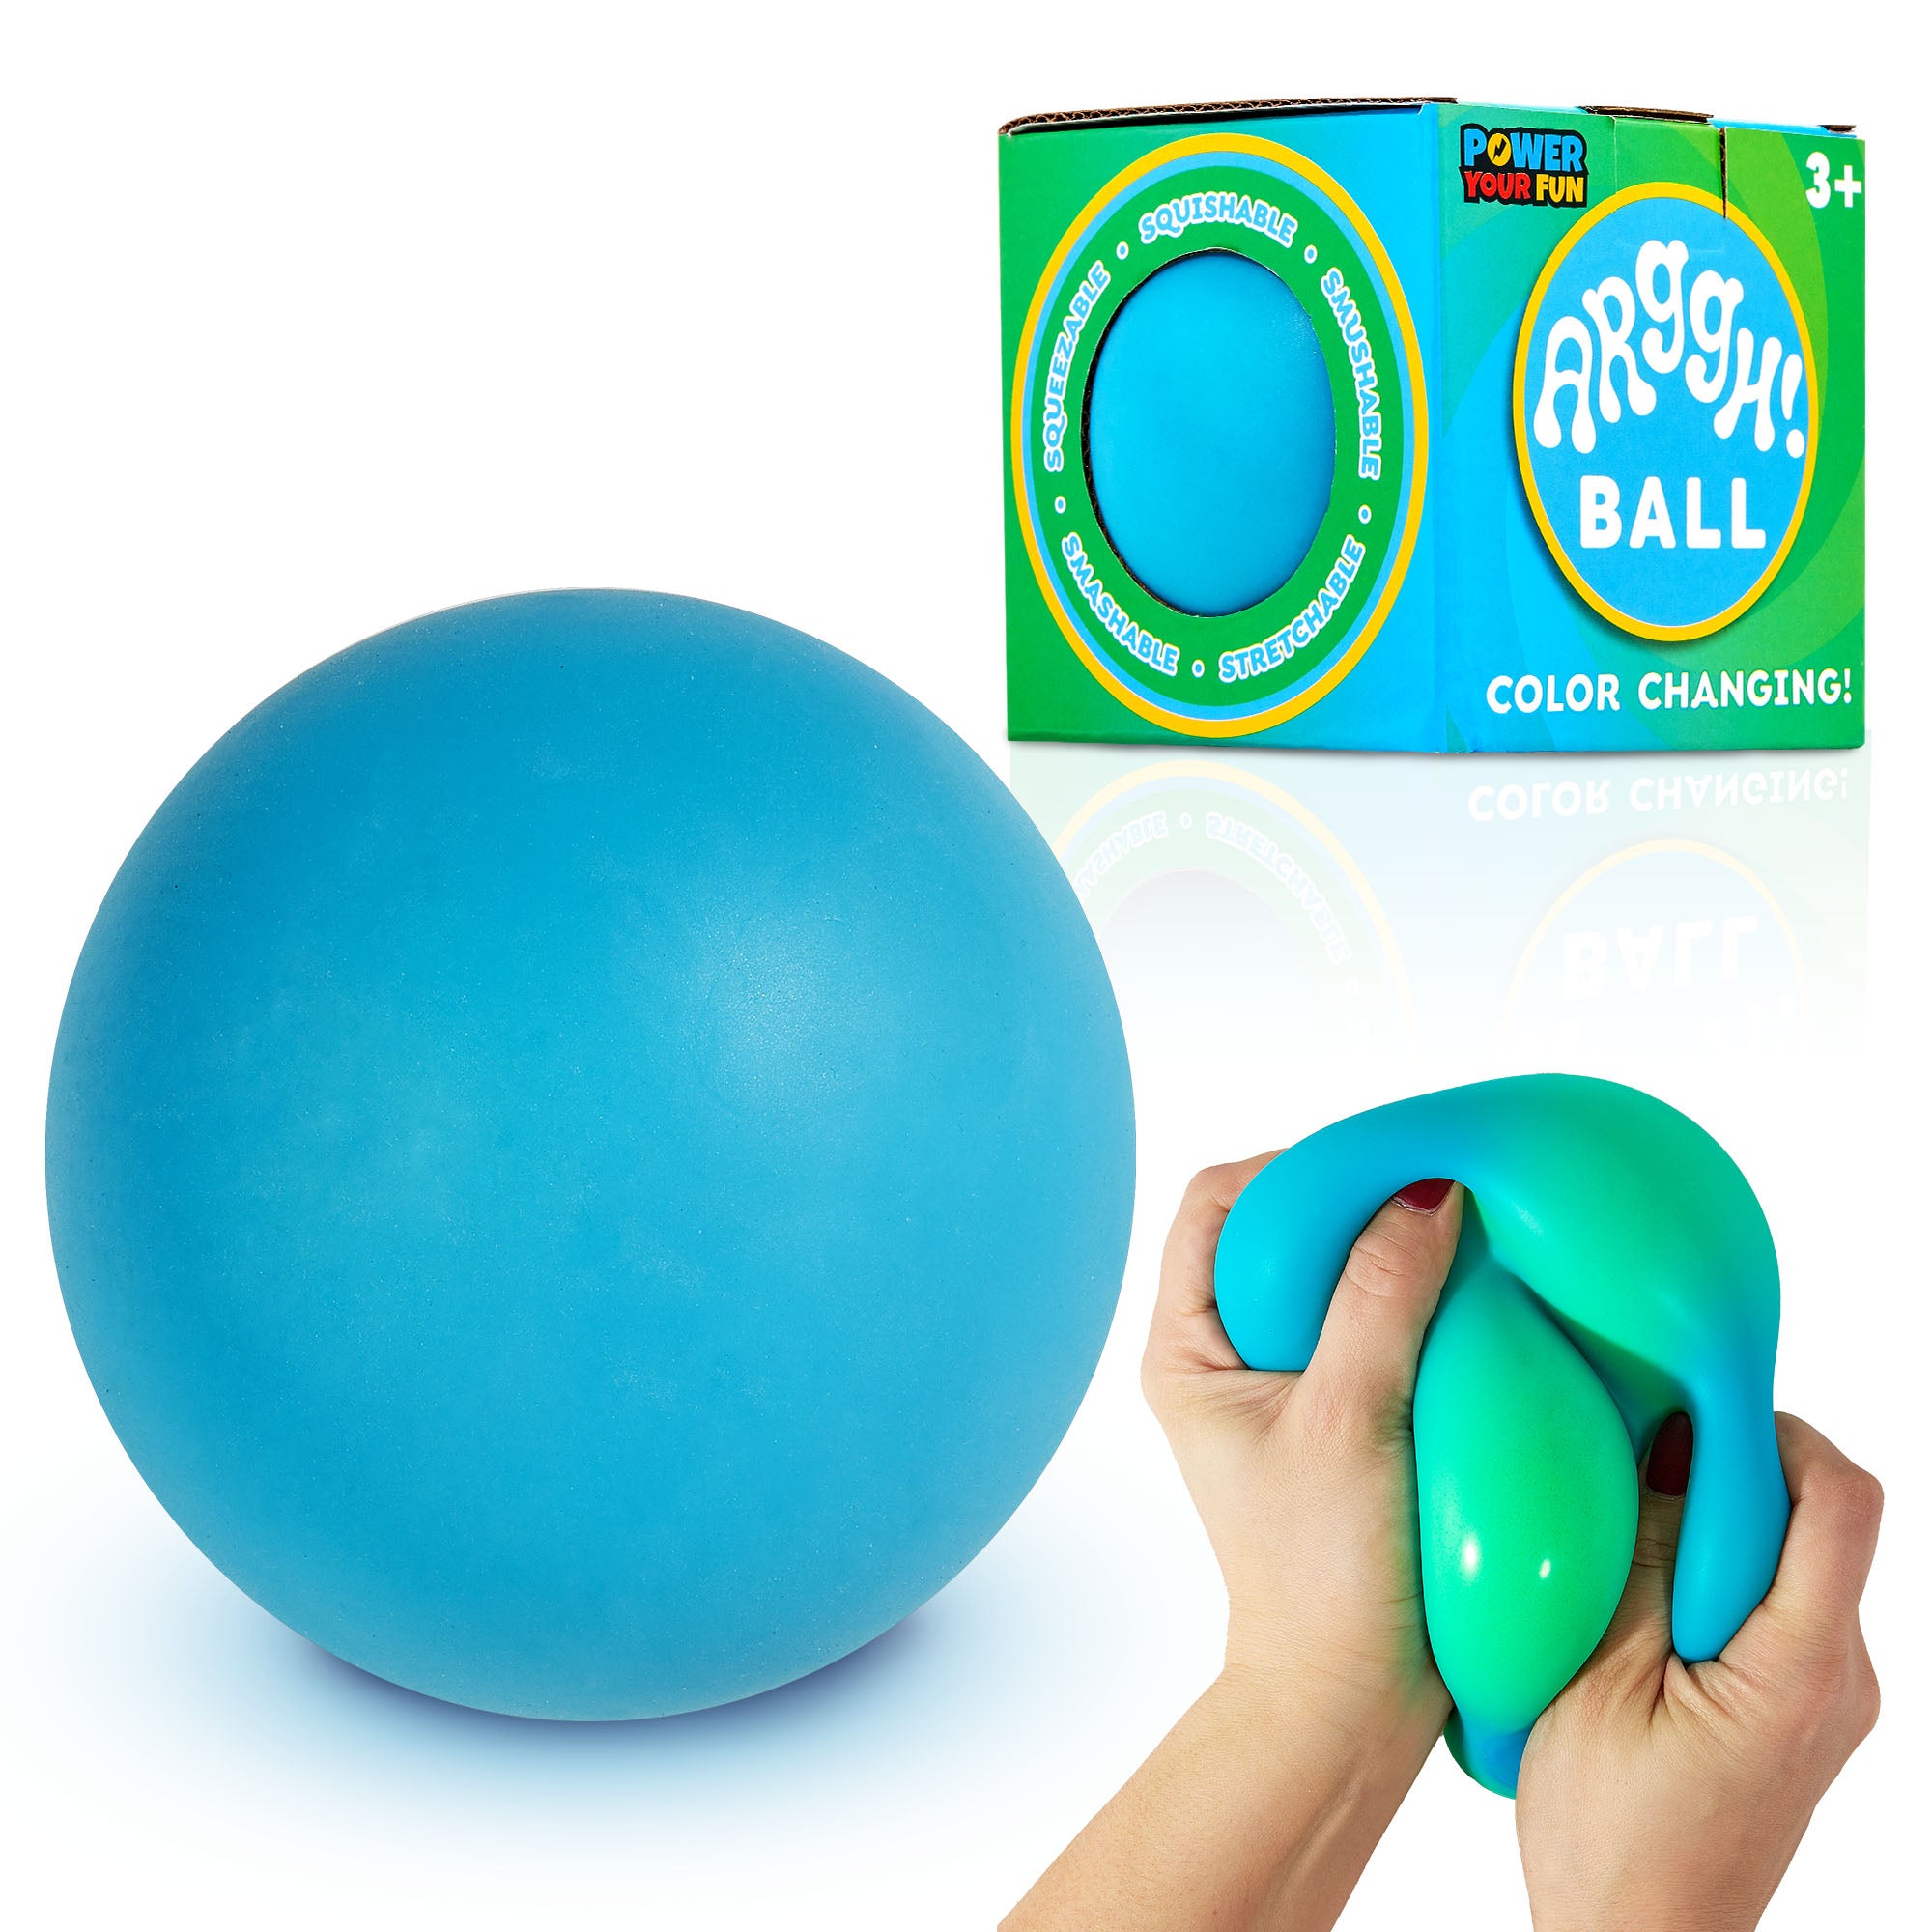 Power Your Fun Arggh Stress Ball for Adults and Kids - 3.75 Inch